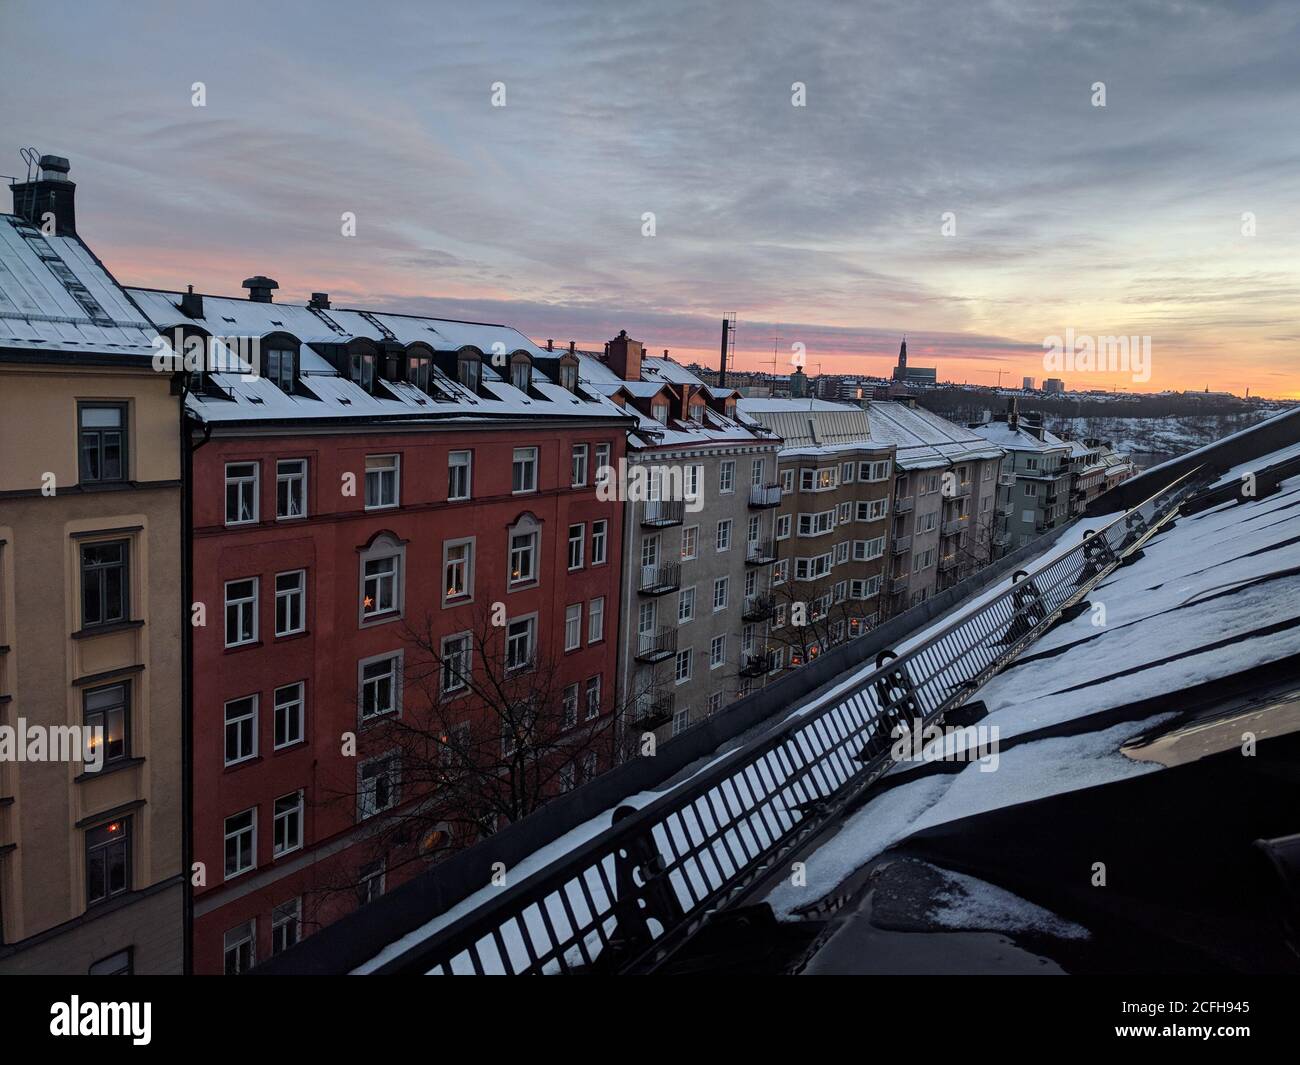 Sweden Red Light District High Resolution Stock Photography and Images -  Alamy